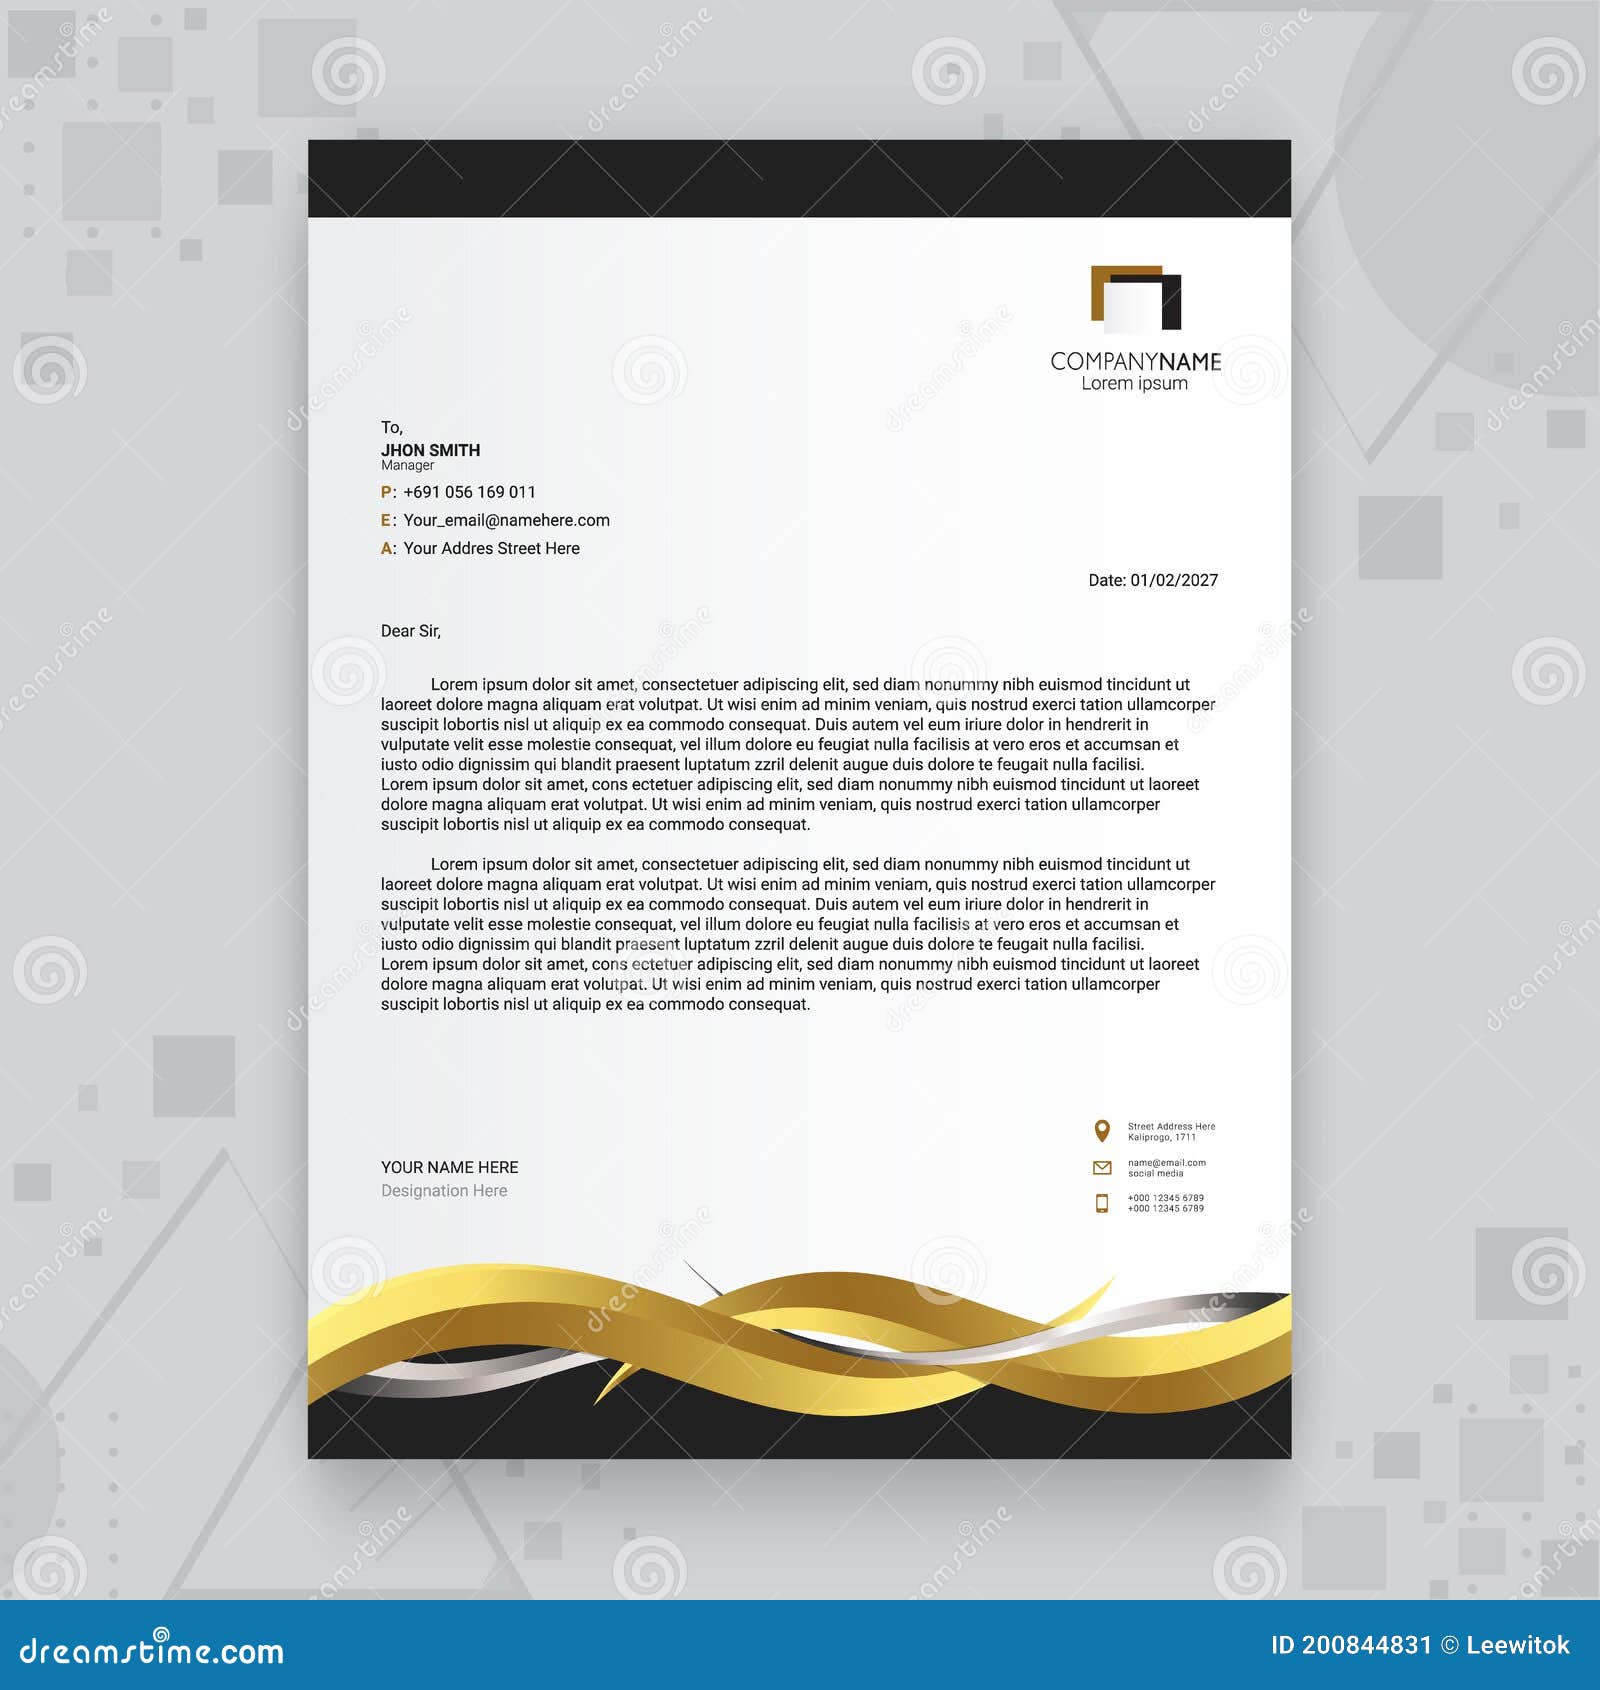 Luxury Golden Creative Business Letterhead Template Design Stock Within Free Construction Company Letterhead Templates